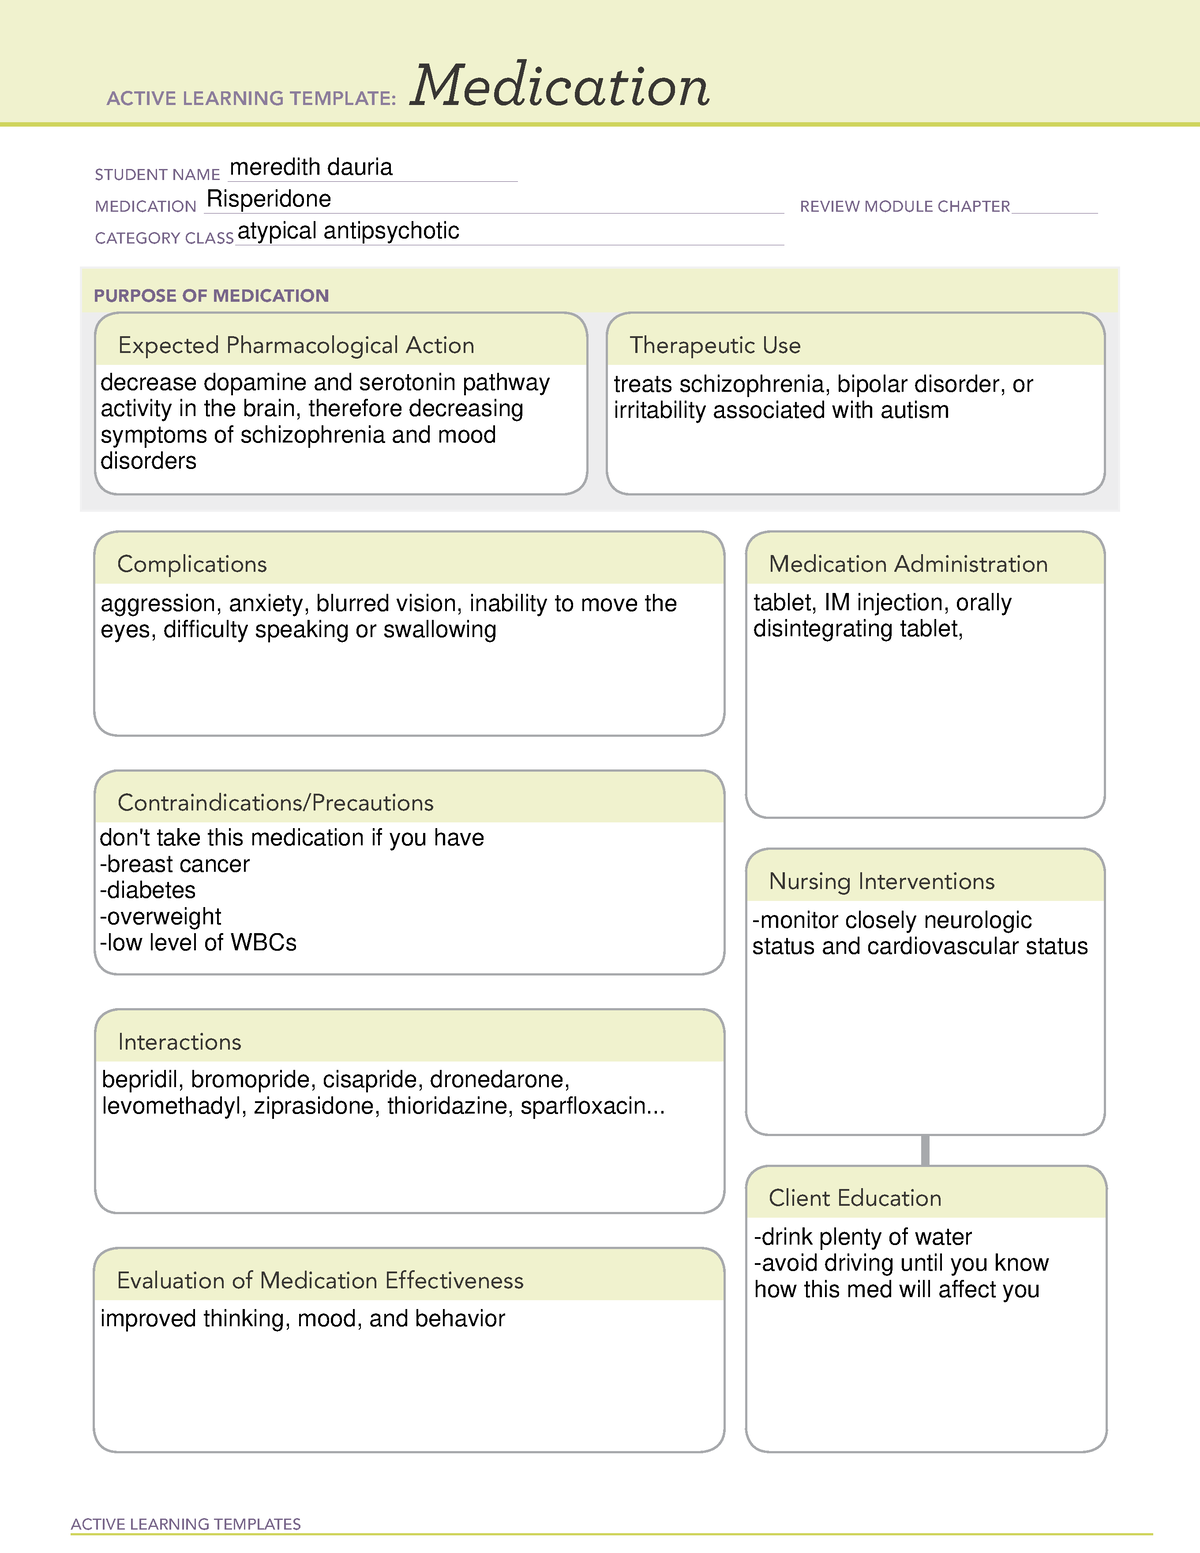 ATI active learning template Risperidone ACTIVE LEARNING TEMPLATES